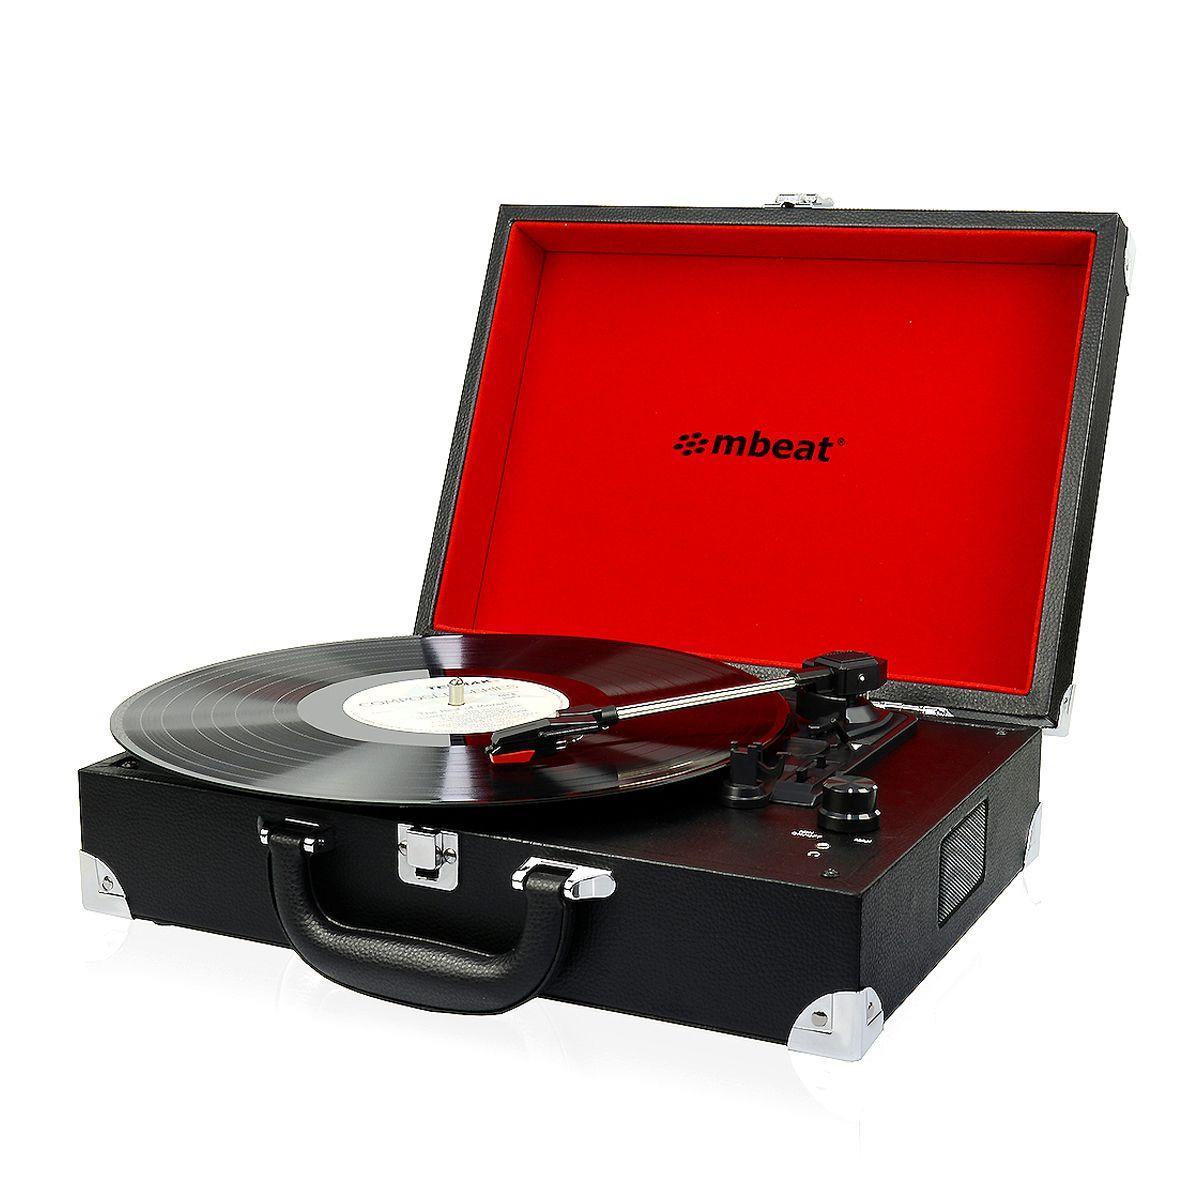 【Sale】mbeat Retro Briefcase-styled USB Turntable